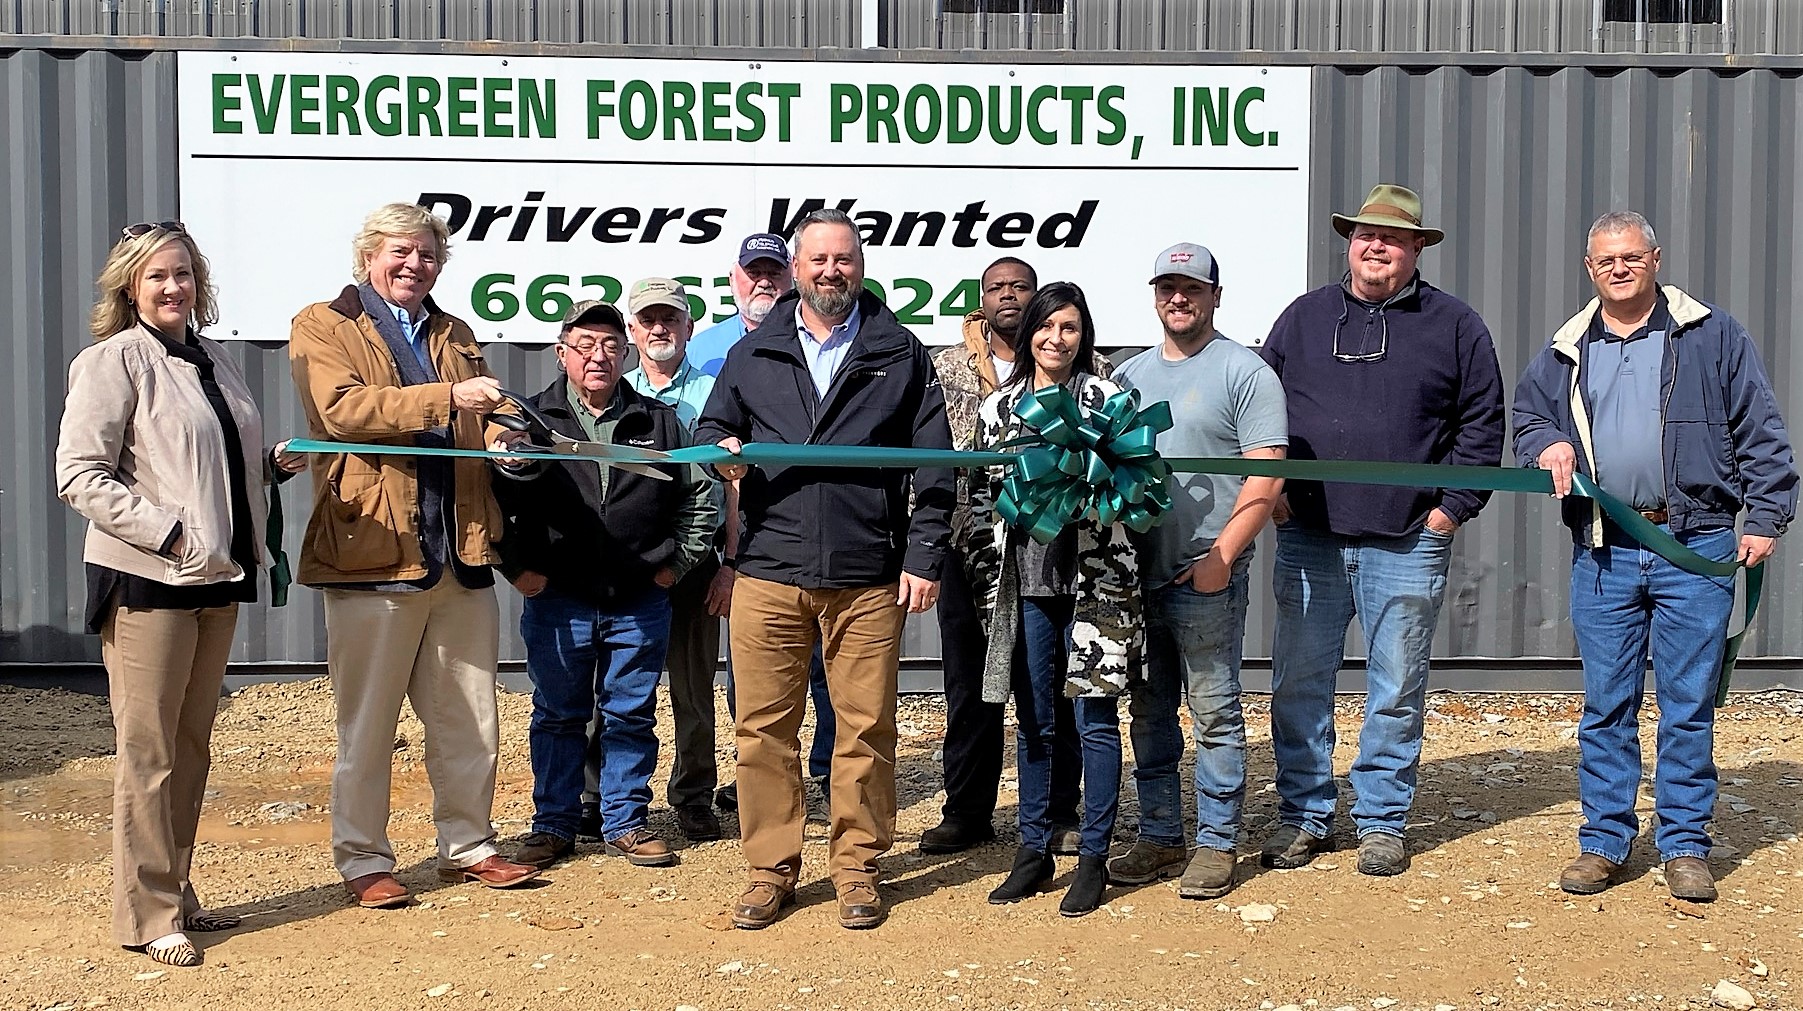 Evergreen Forest Products, Inc. 9183 Mobile Rd, Greenville Alabama 36037